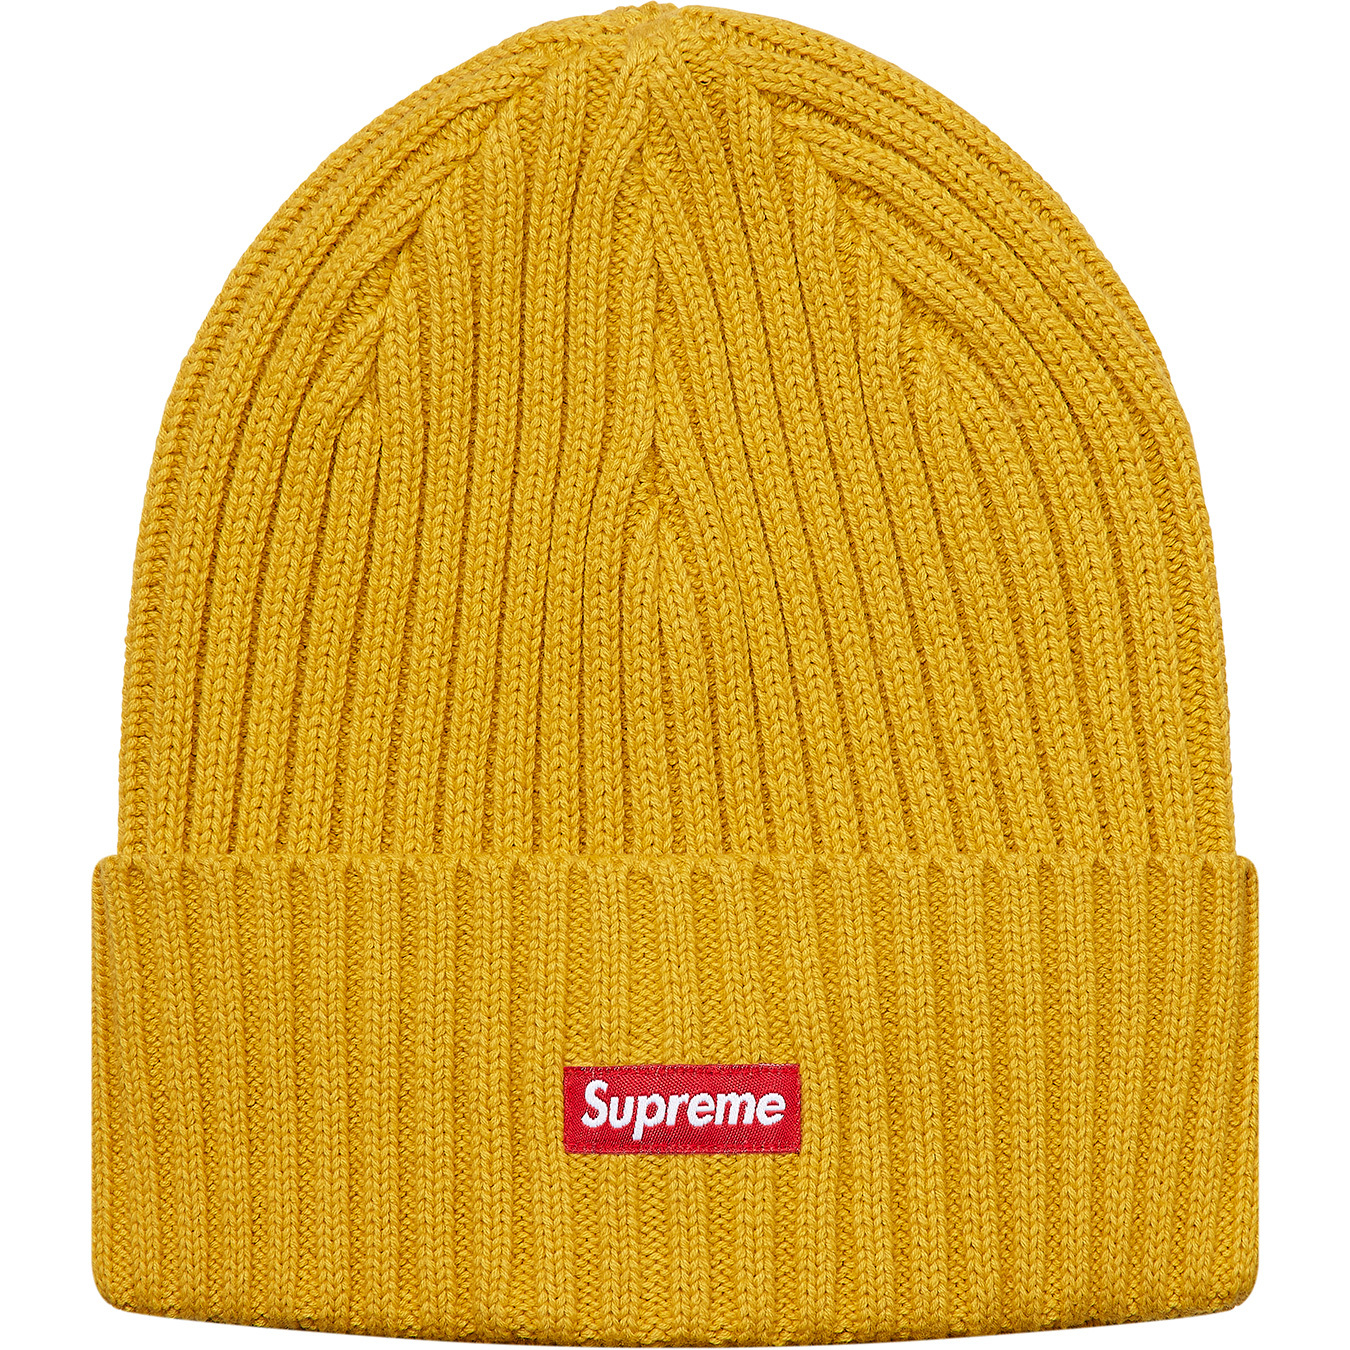 Supreme Overdyed Ribbed Knit Beanie - Red